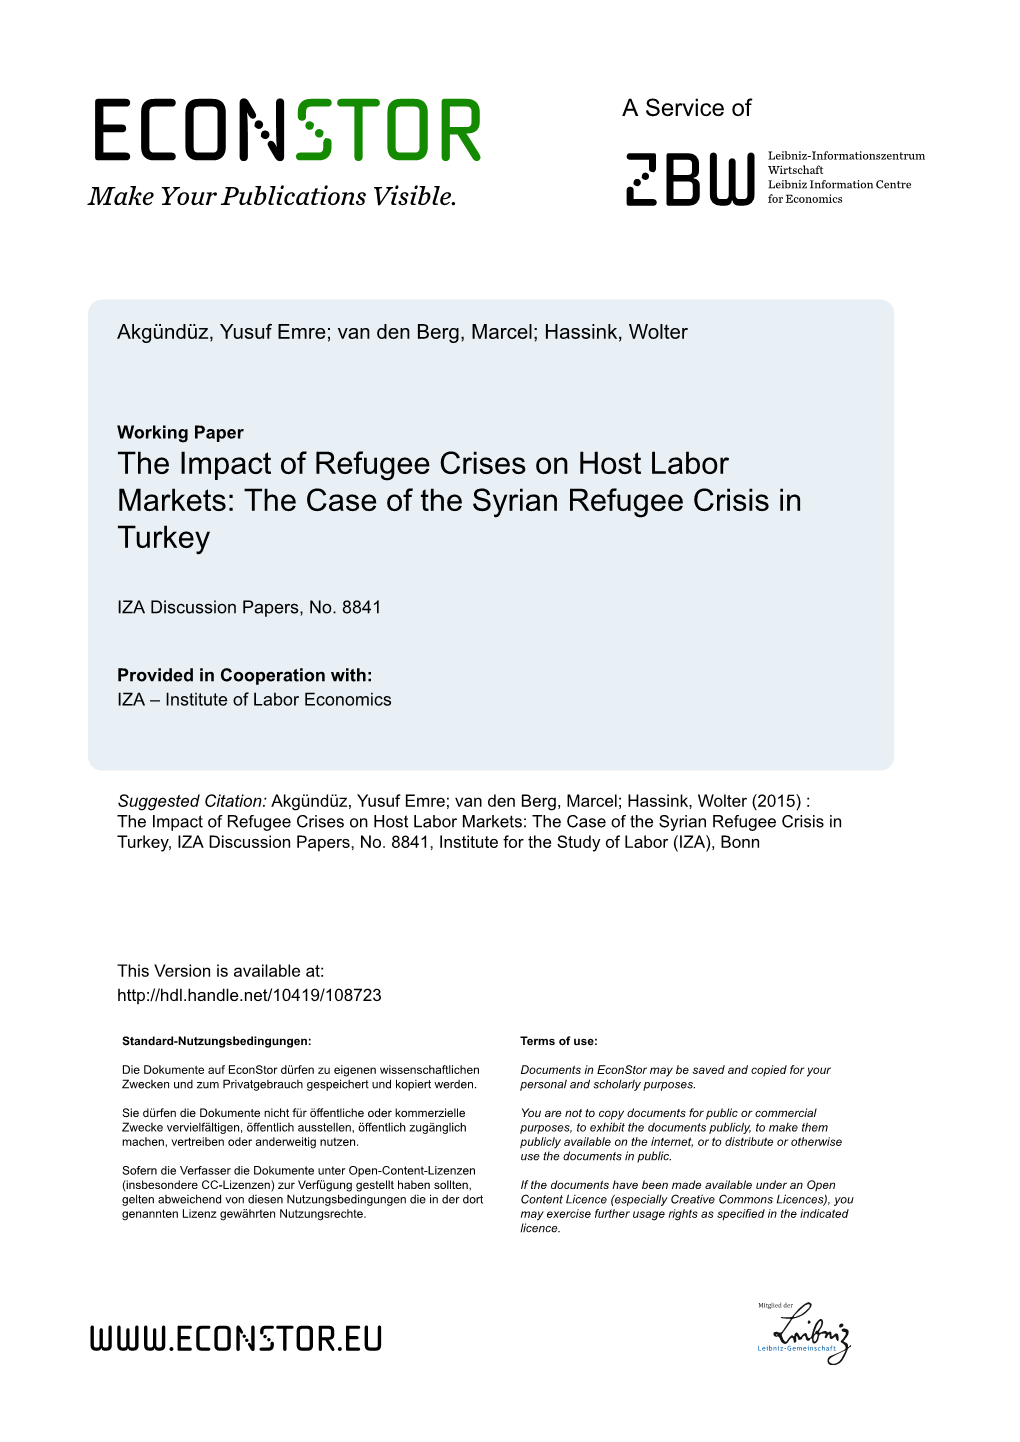 The Case of the Syrian Refugee Crisis in Turkey